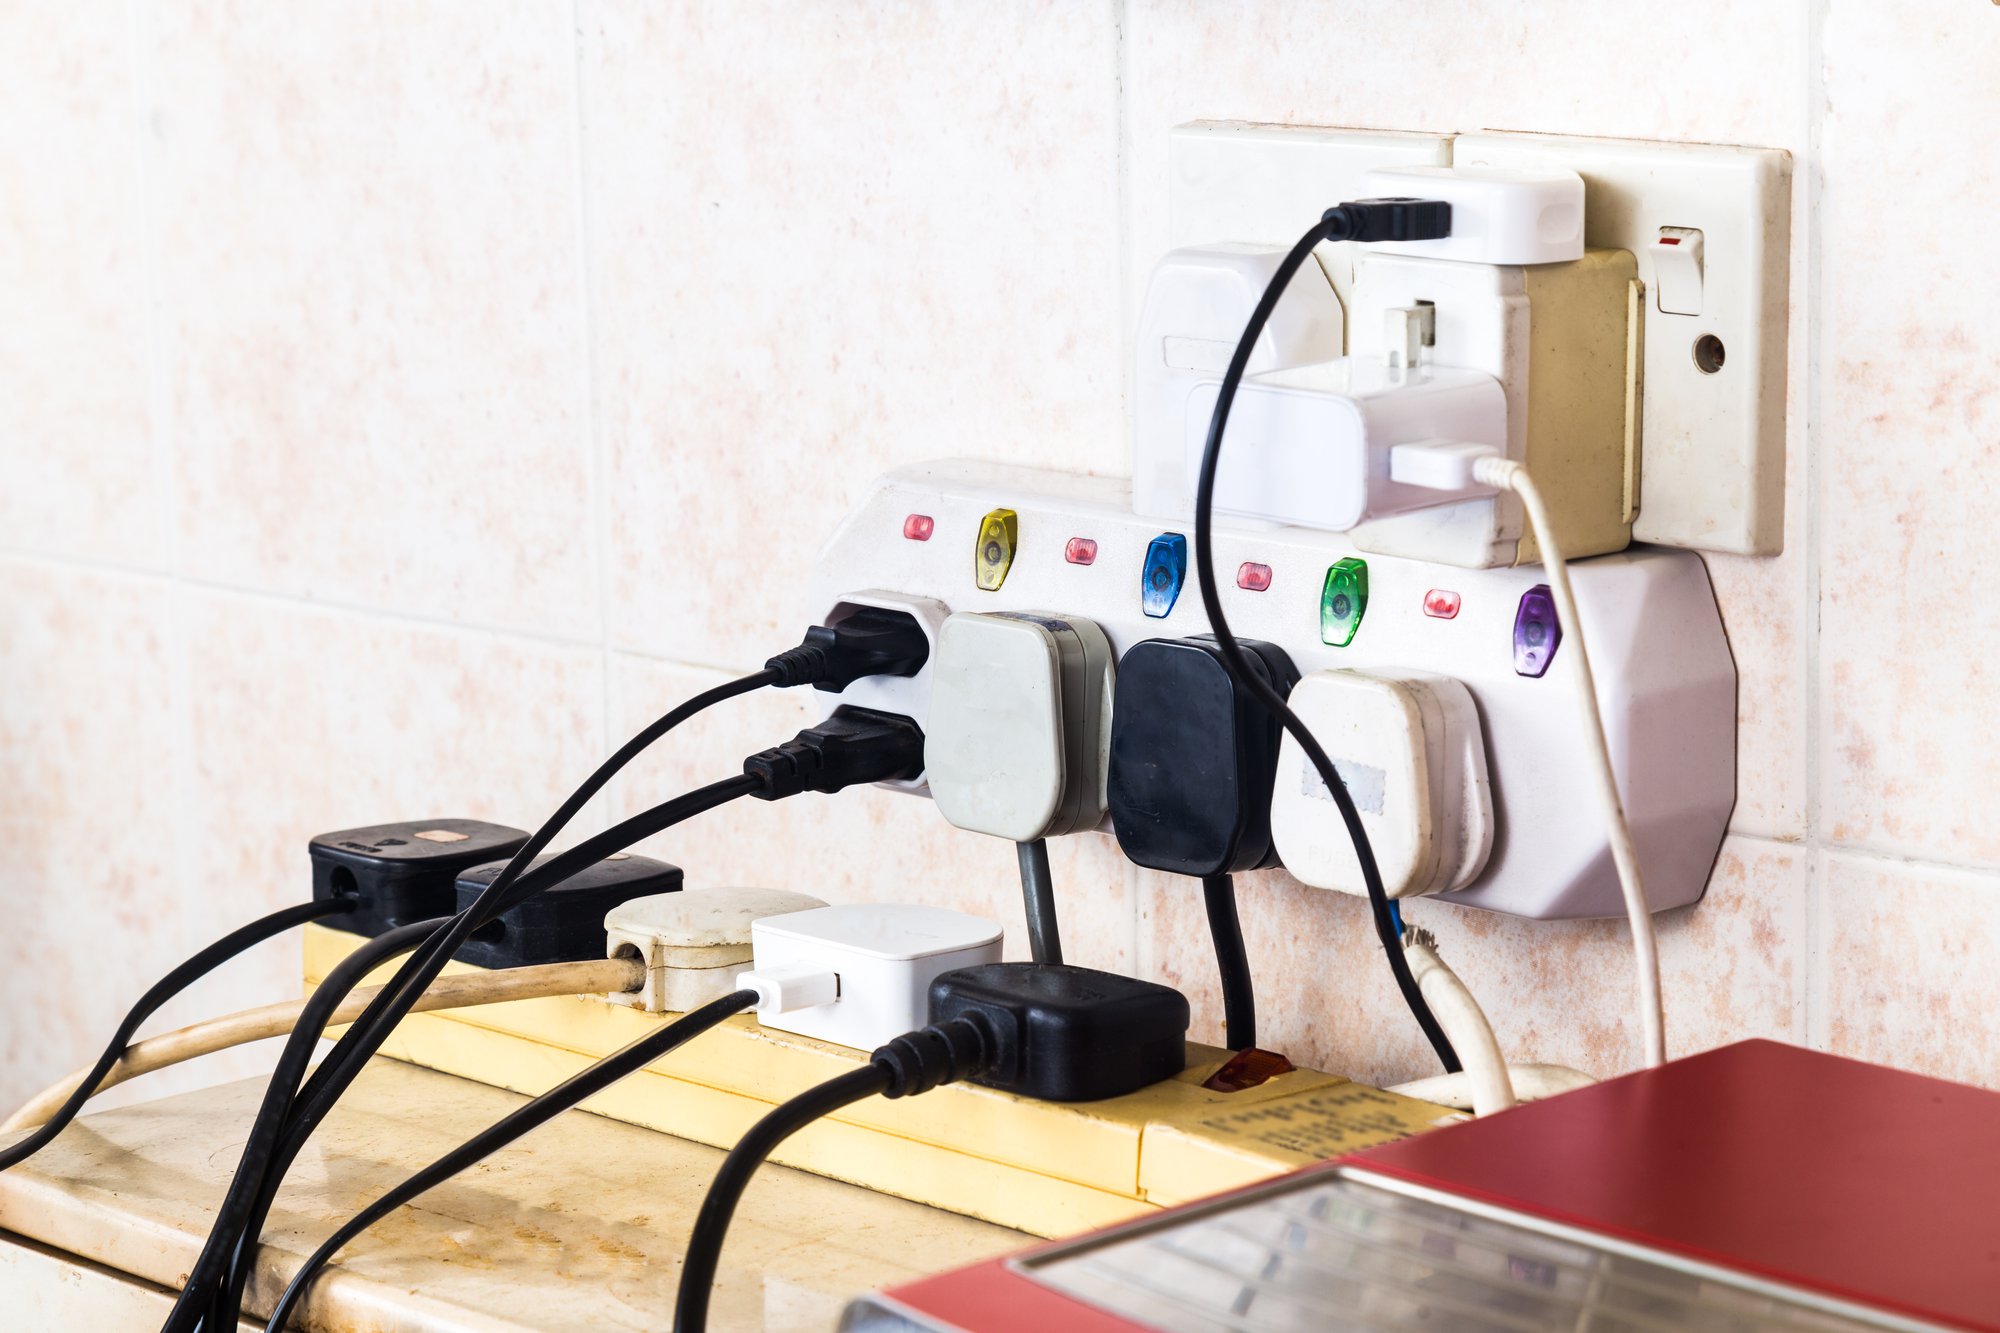 Multiple electricity plugs on adapter risk overloading and dange